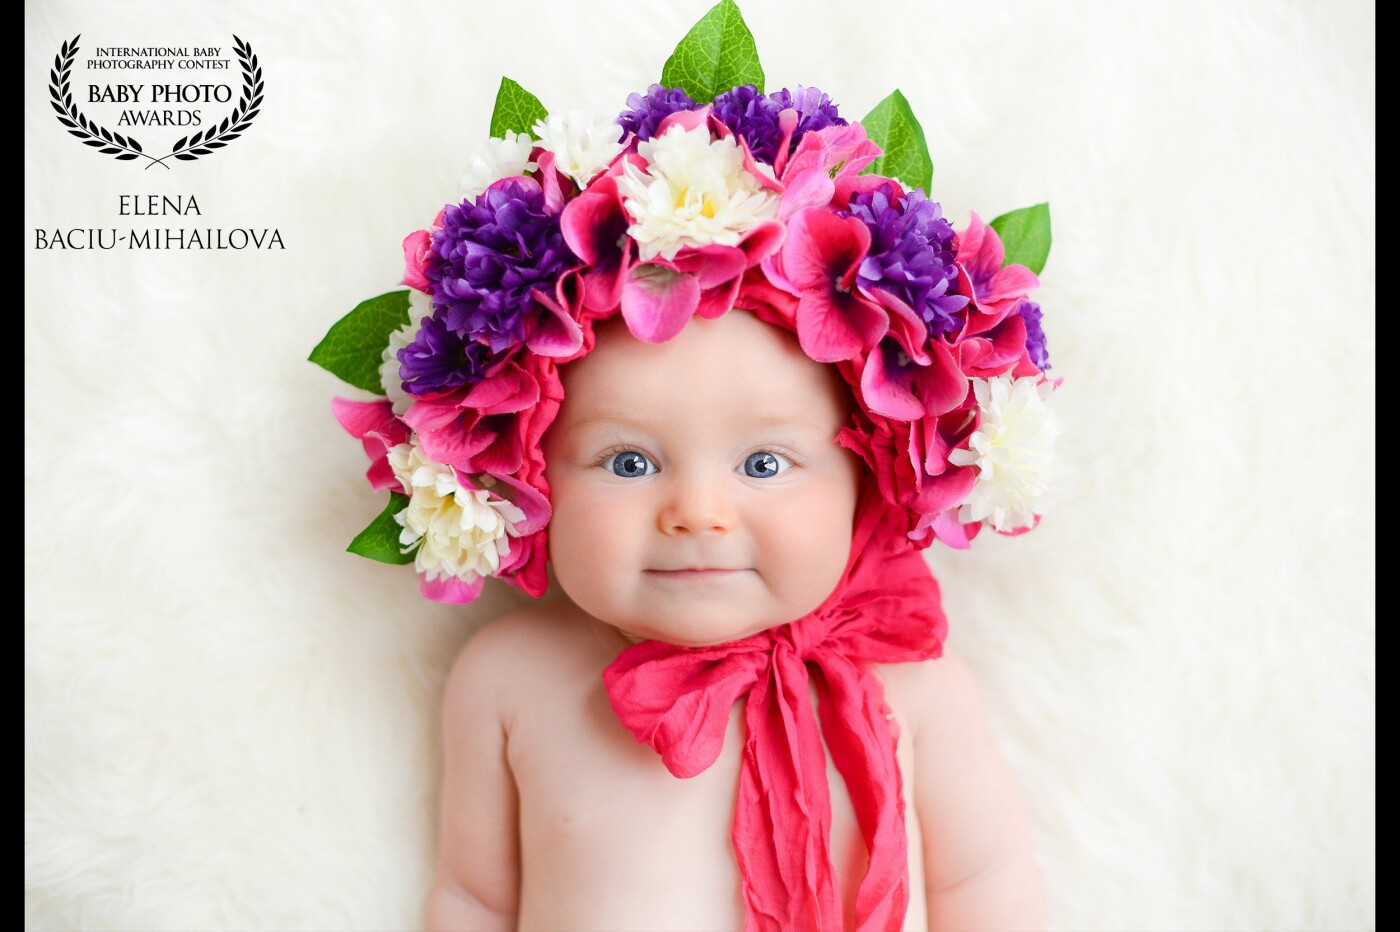 This is my first attempt using a floral bonnet and definitely not the last one. I love how all these flowers are framing the baby's face, making her look so adorable!  